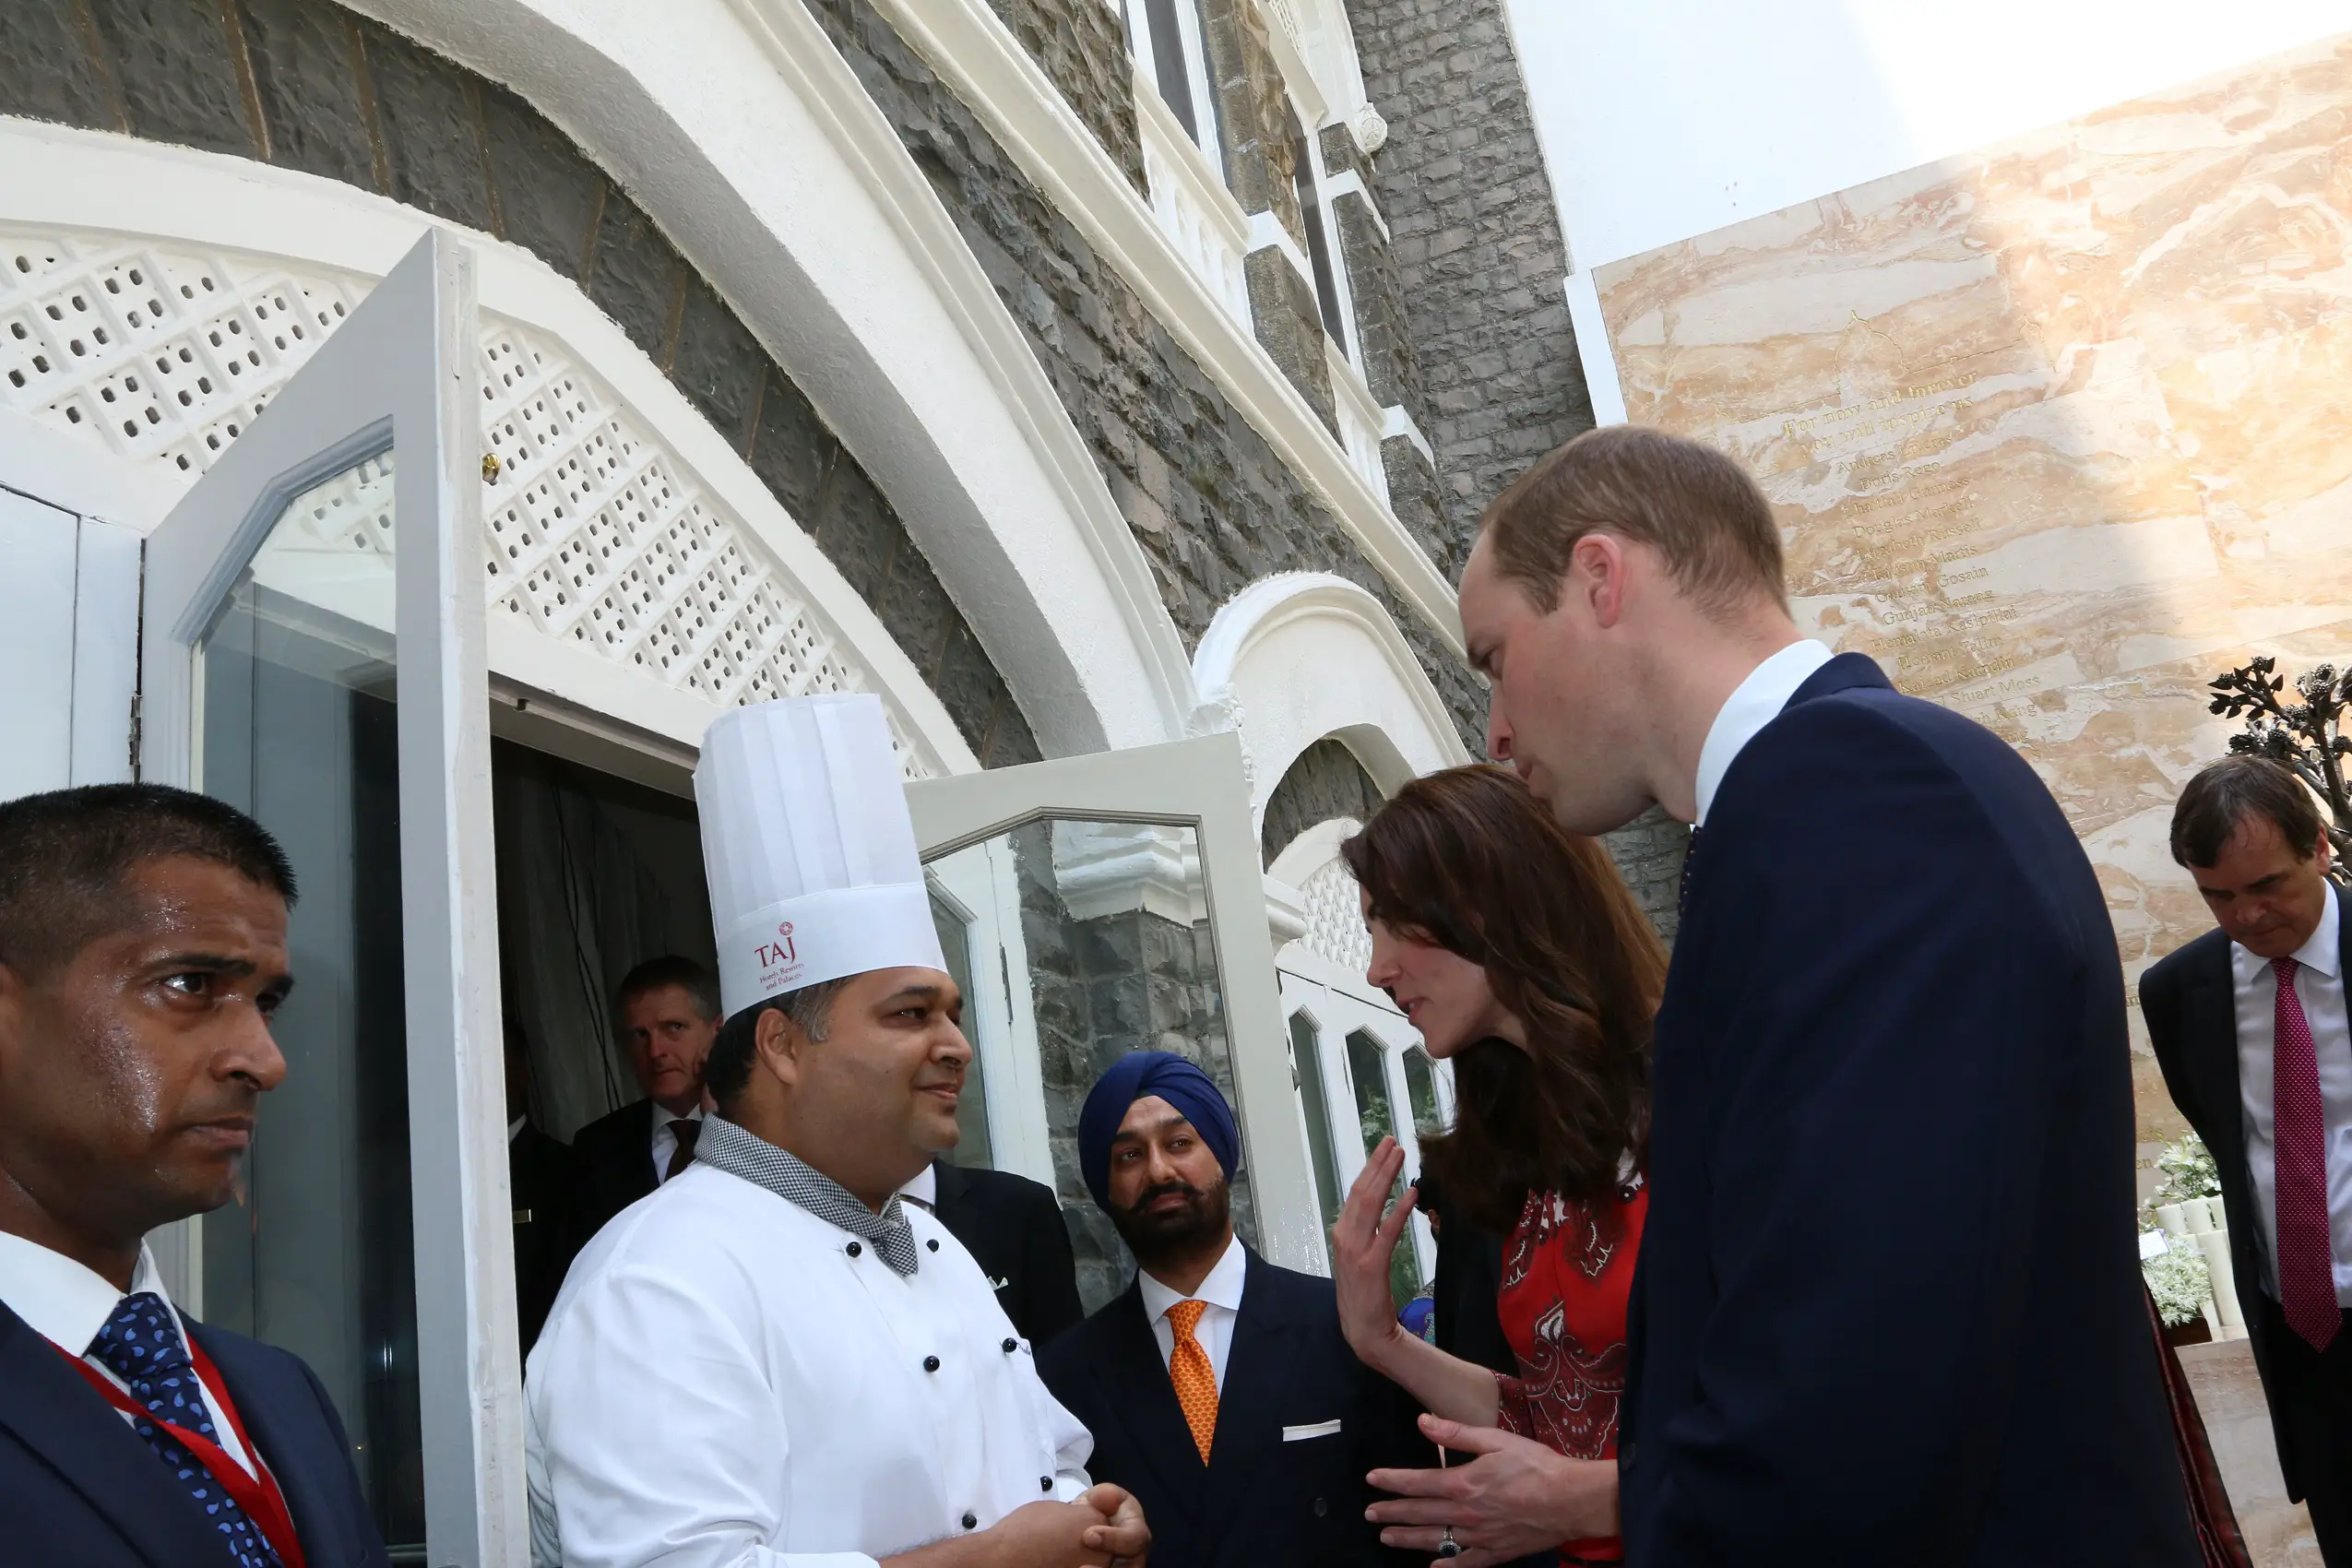 Then Duke and Duchess met with the members of the staff who helped guests during the attack